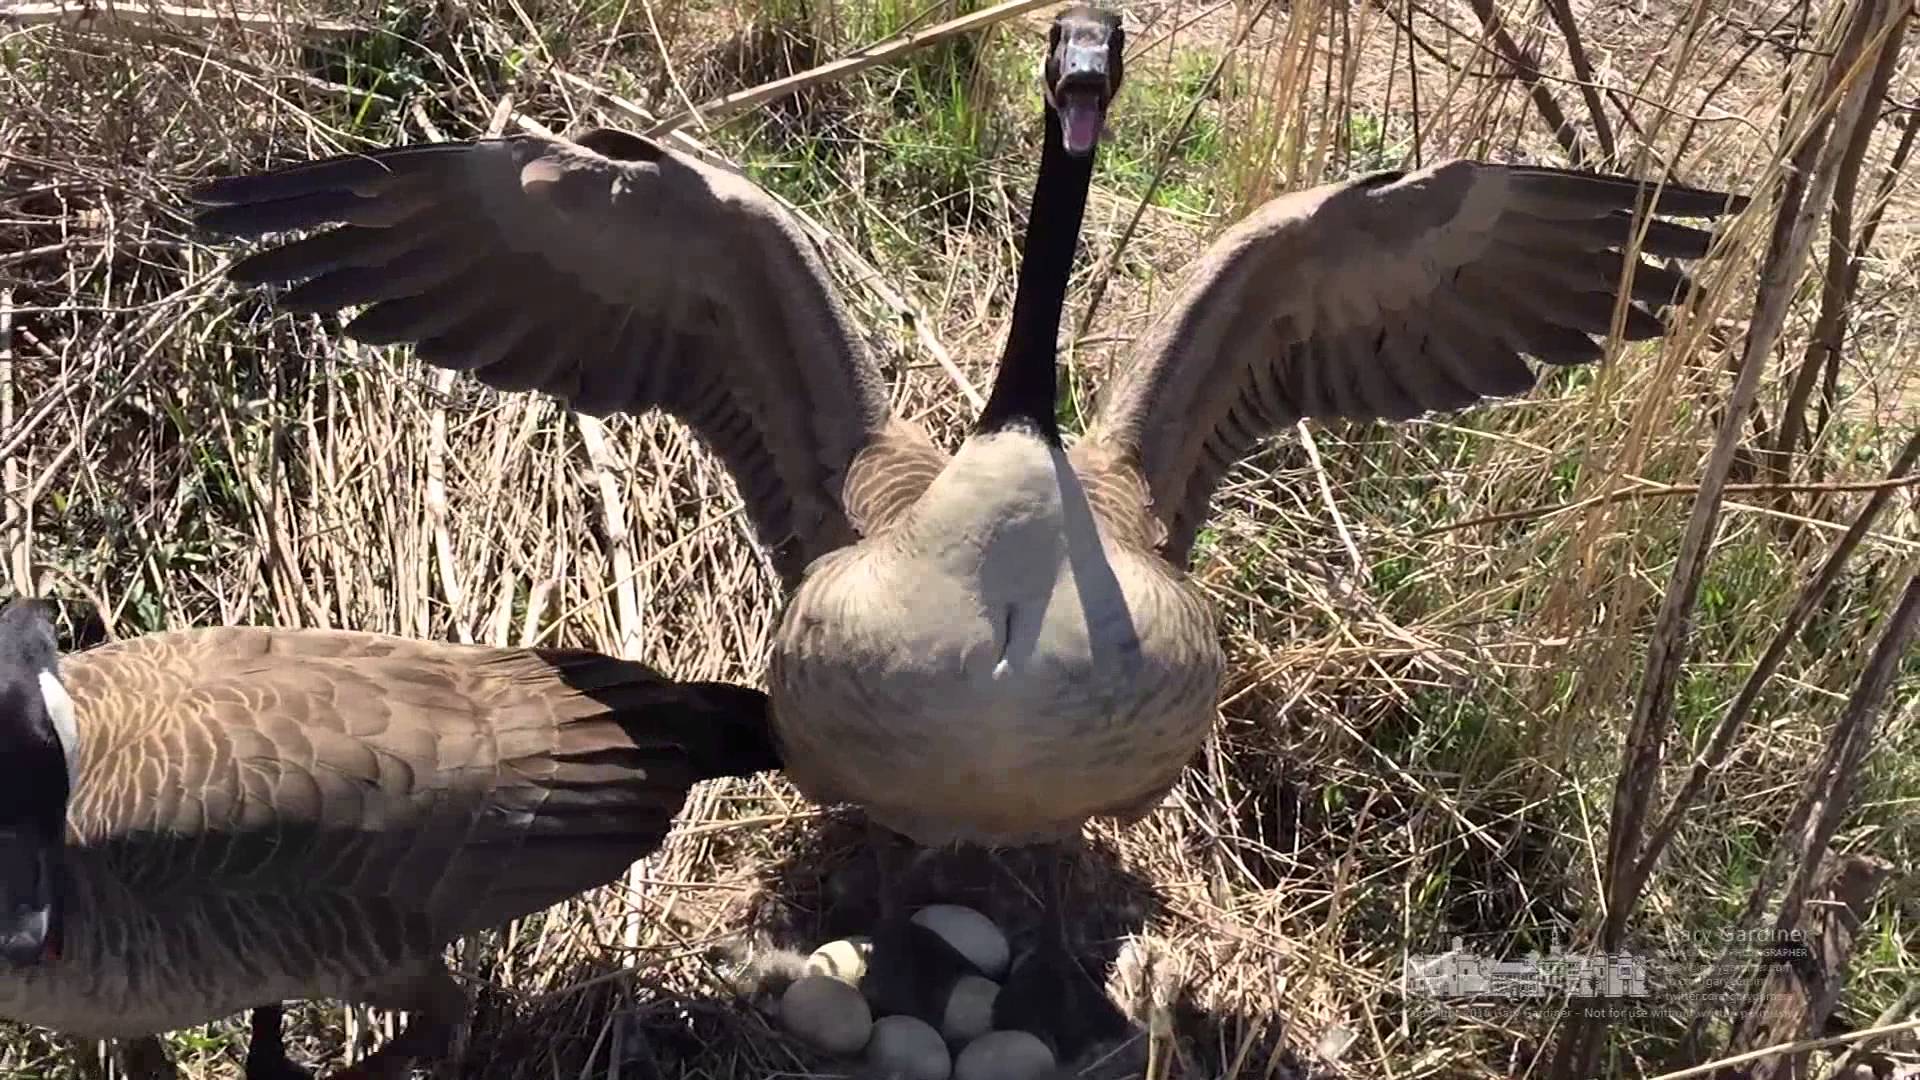 Canada geese on the nest at Highlands - April 3, 2016. - YouTube